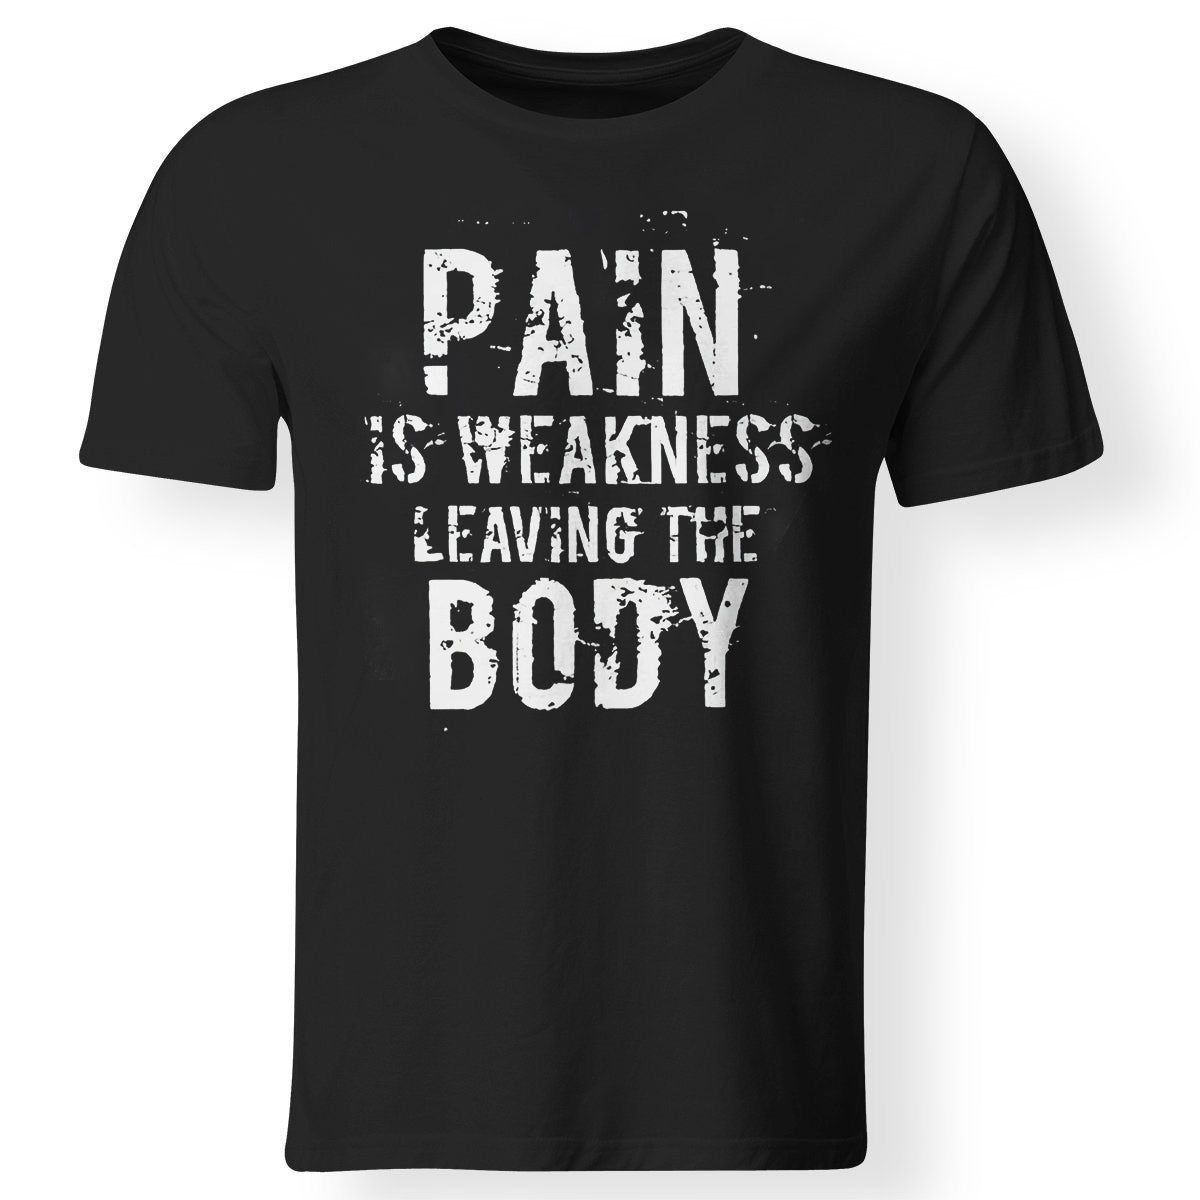 Pain Is Weakness Leaving The Body Printed T-shirt